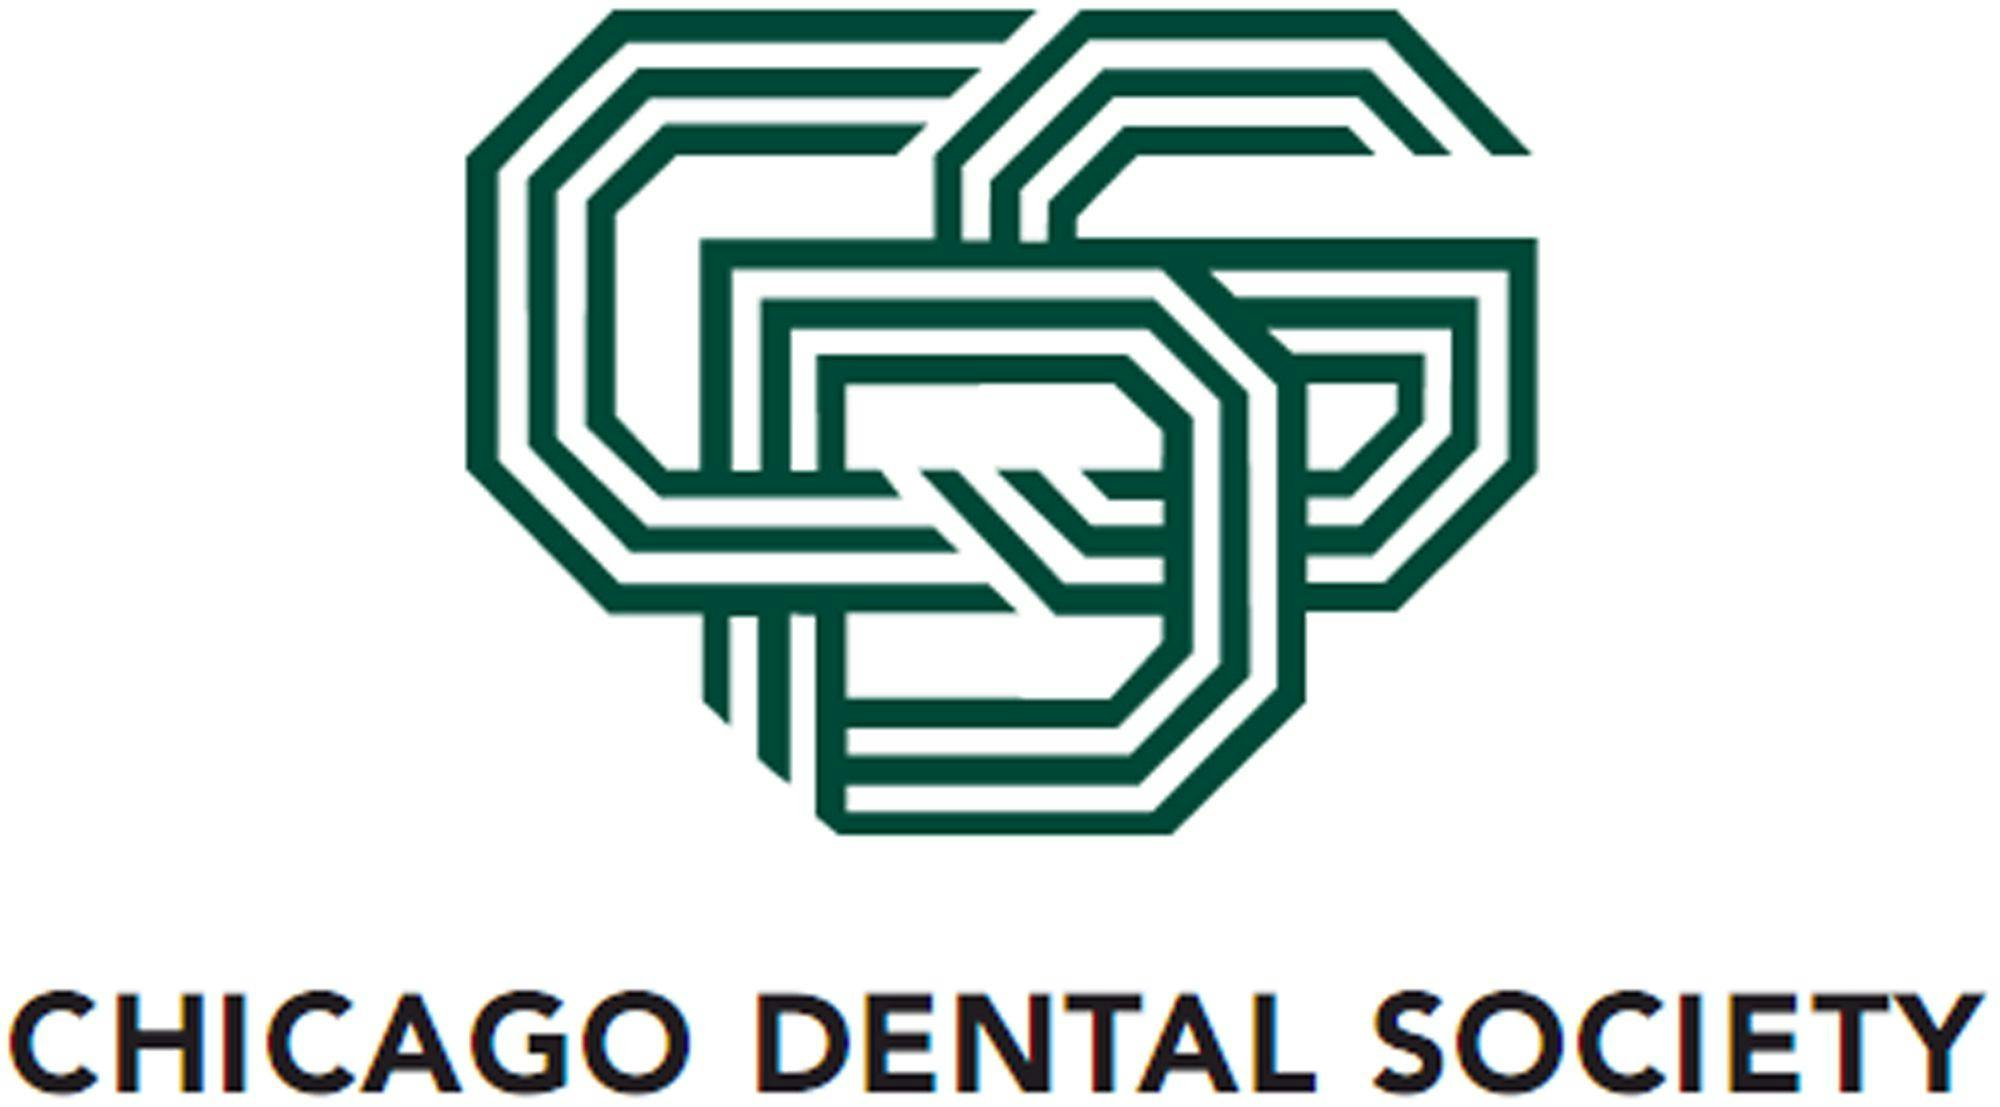 Chicago Dental Society Honors Dr Keith Suchy and Karen Davis at Midwinter Meeting